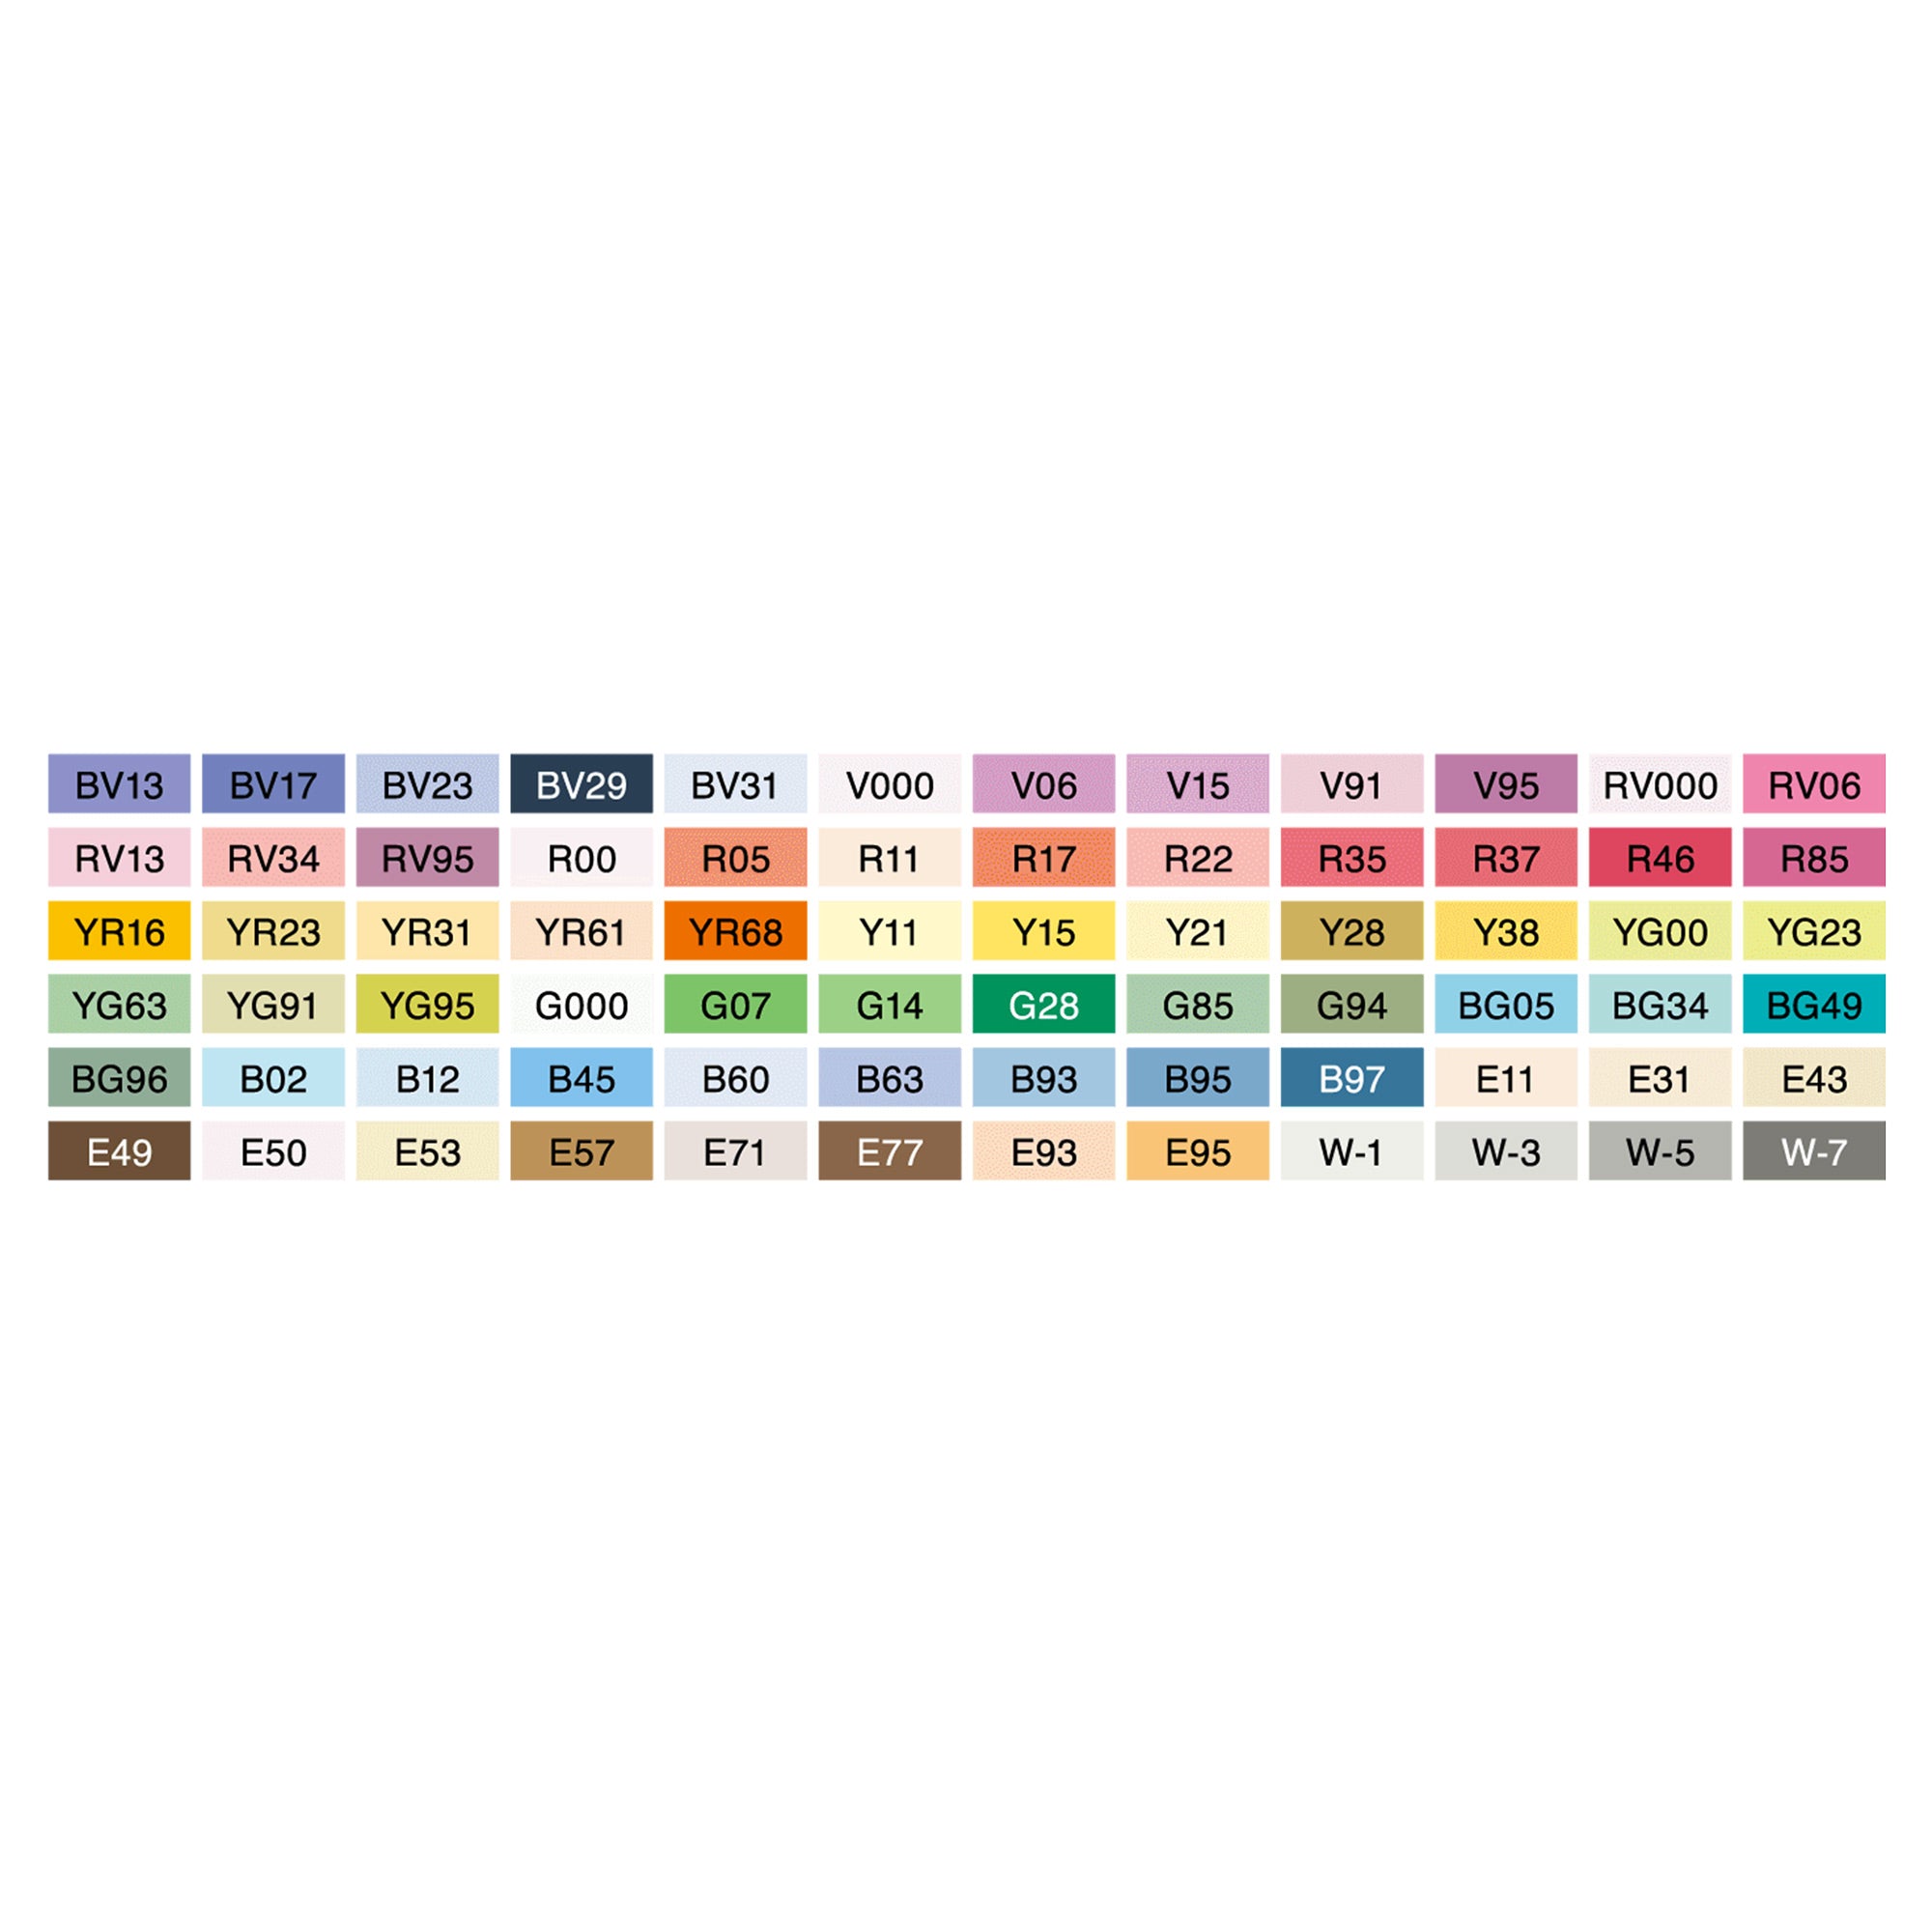 Copic Ciao Marker Set 72 Papercrafting Color 